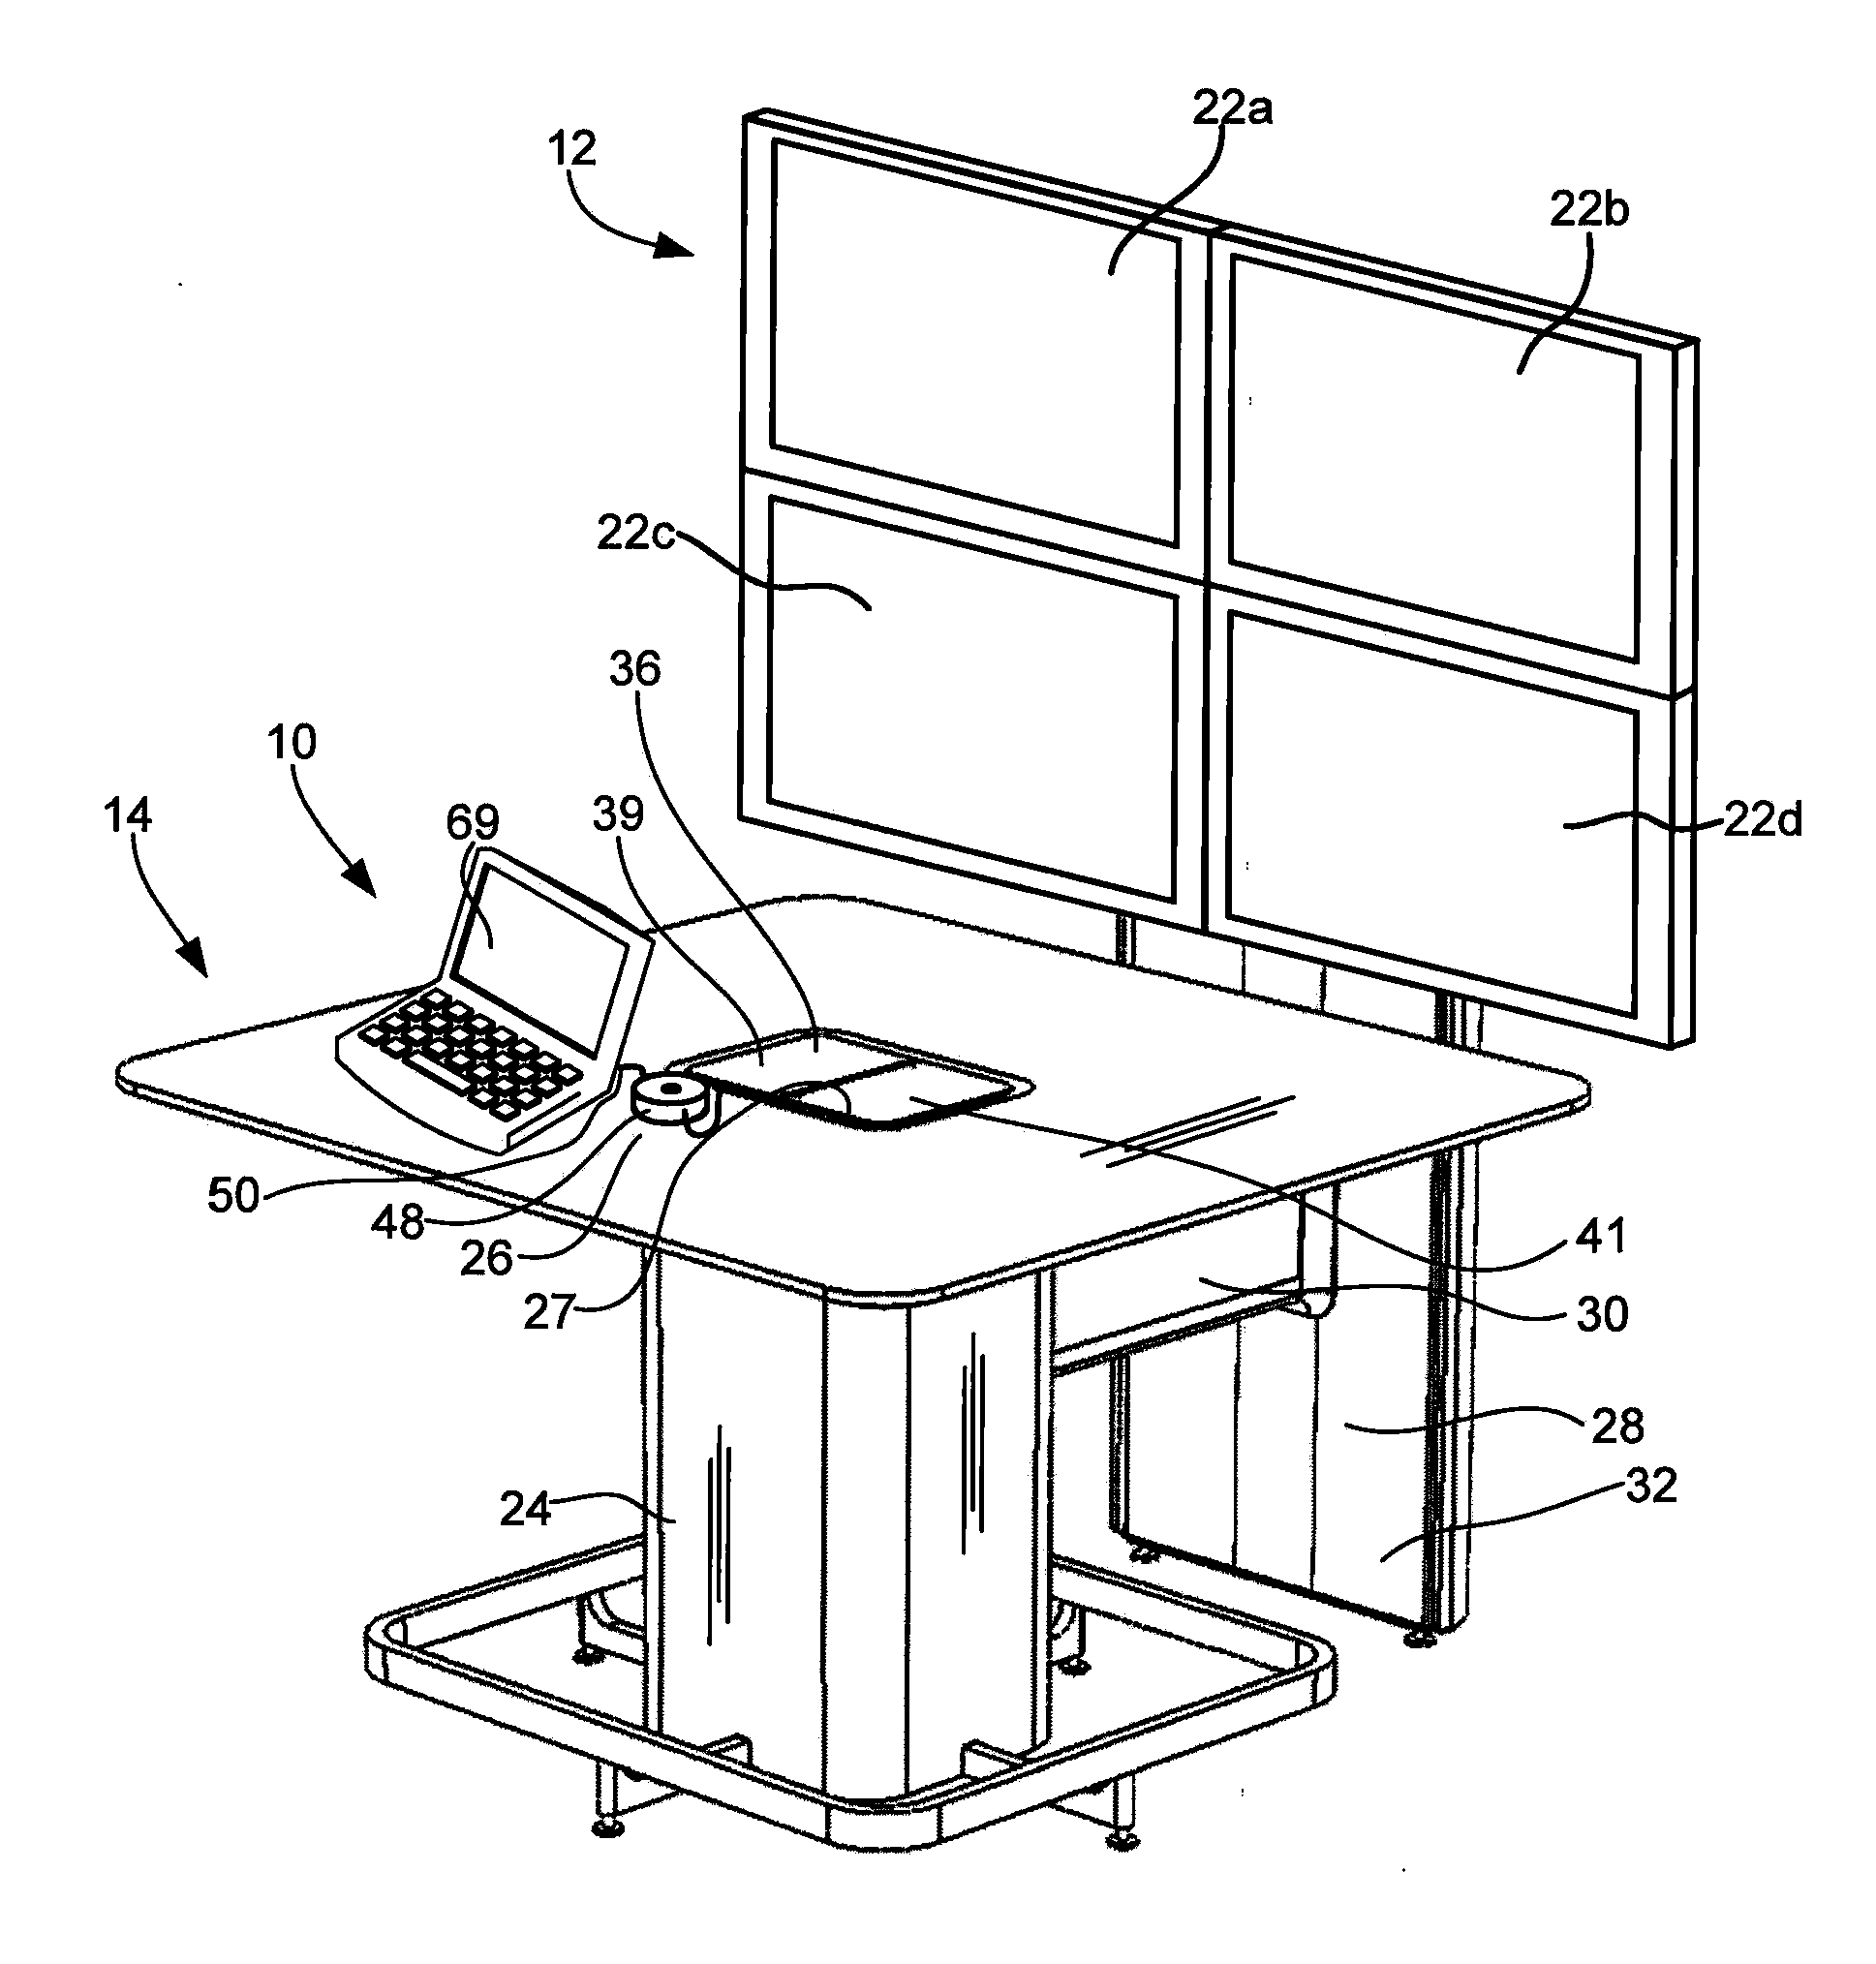 Personal Control Apparatus And Method For Sharing Information In A Collaborative Workspace